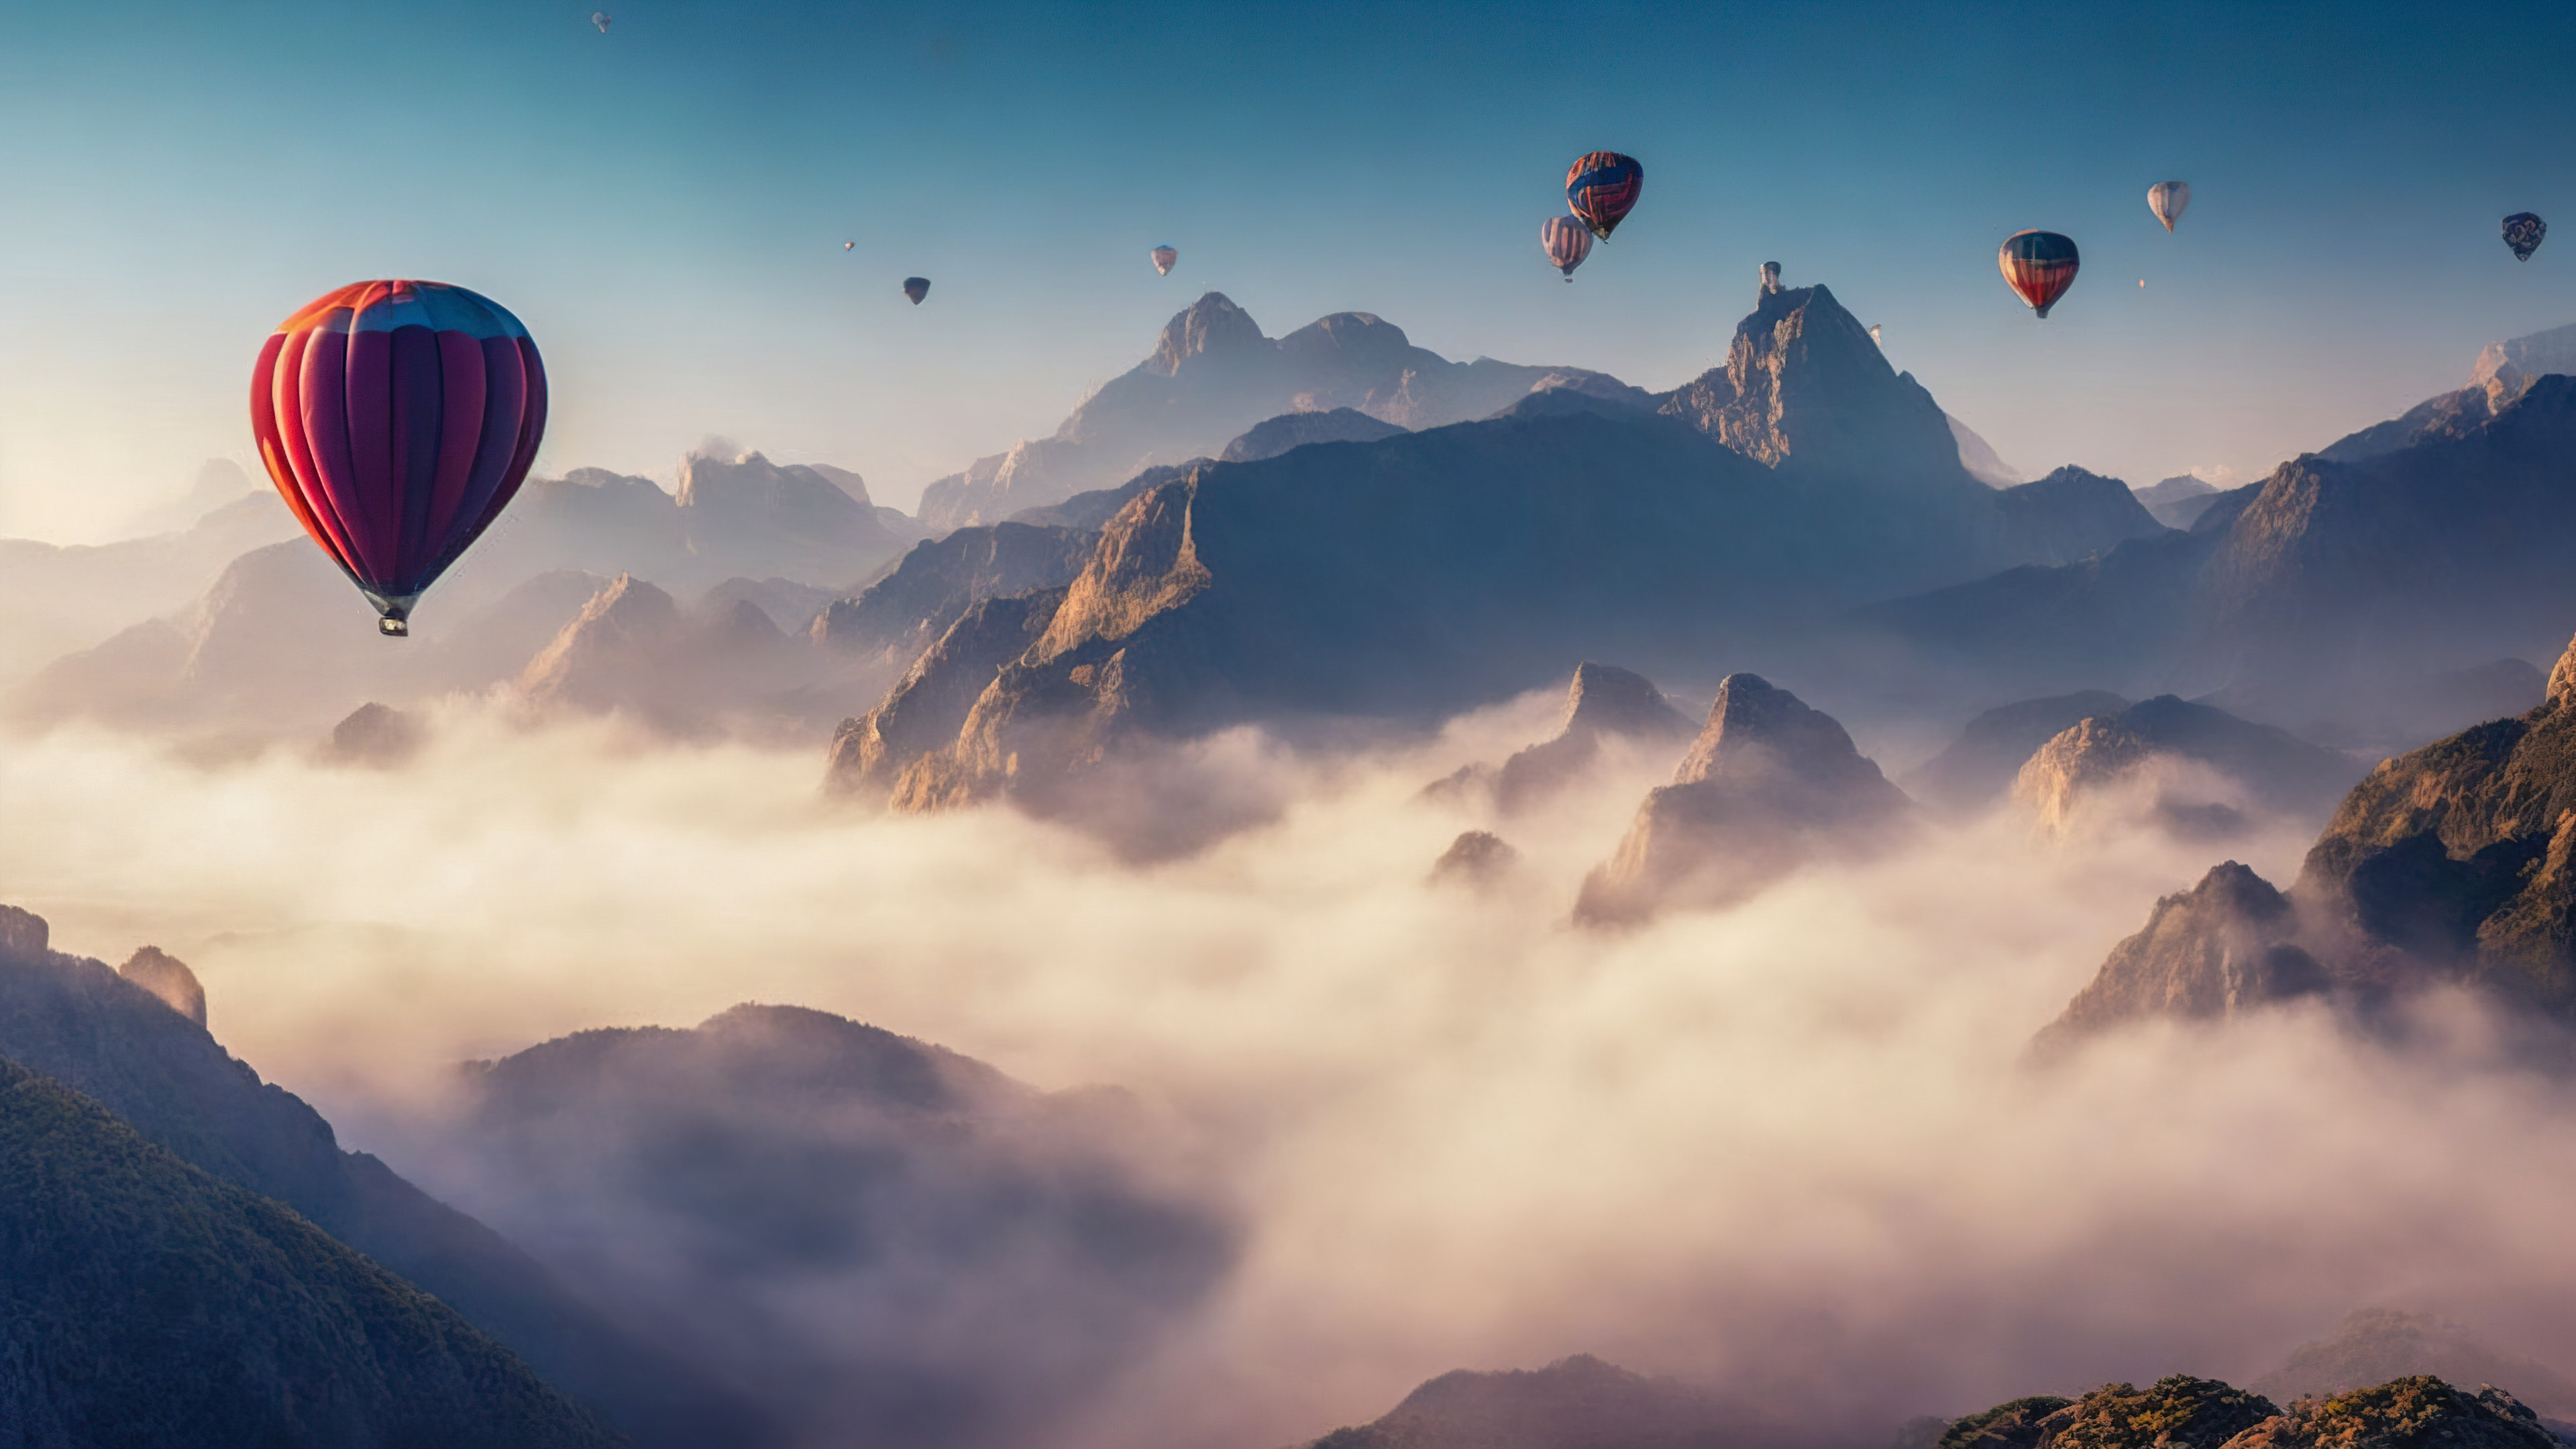 Download the surreal with our mountain landscape wallpaper, capturing a surreal sky filled with hot air balloons drifting peacefully over a misty, mountainous landscape.